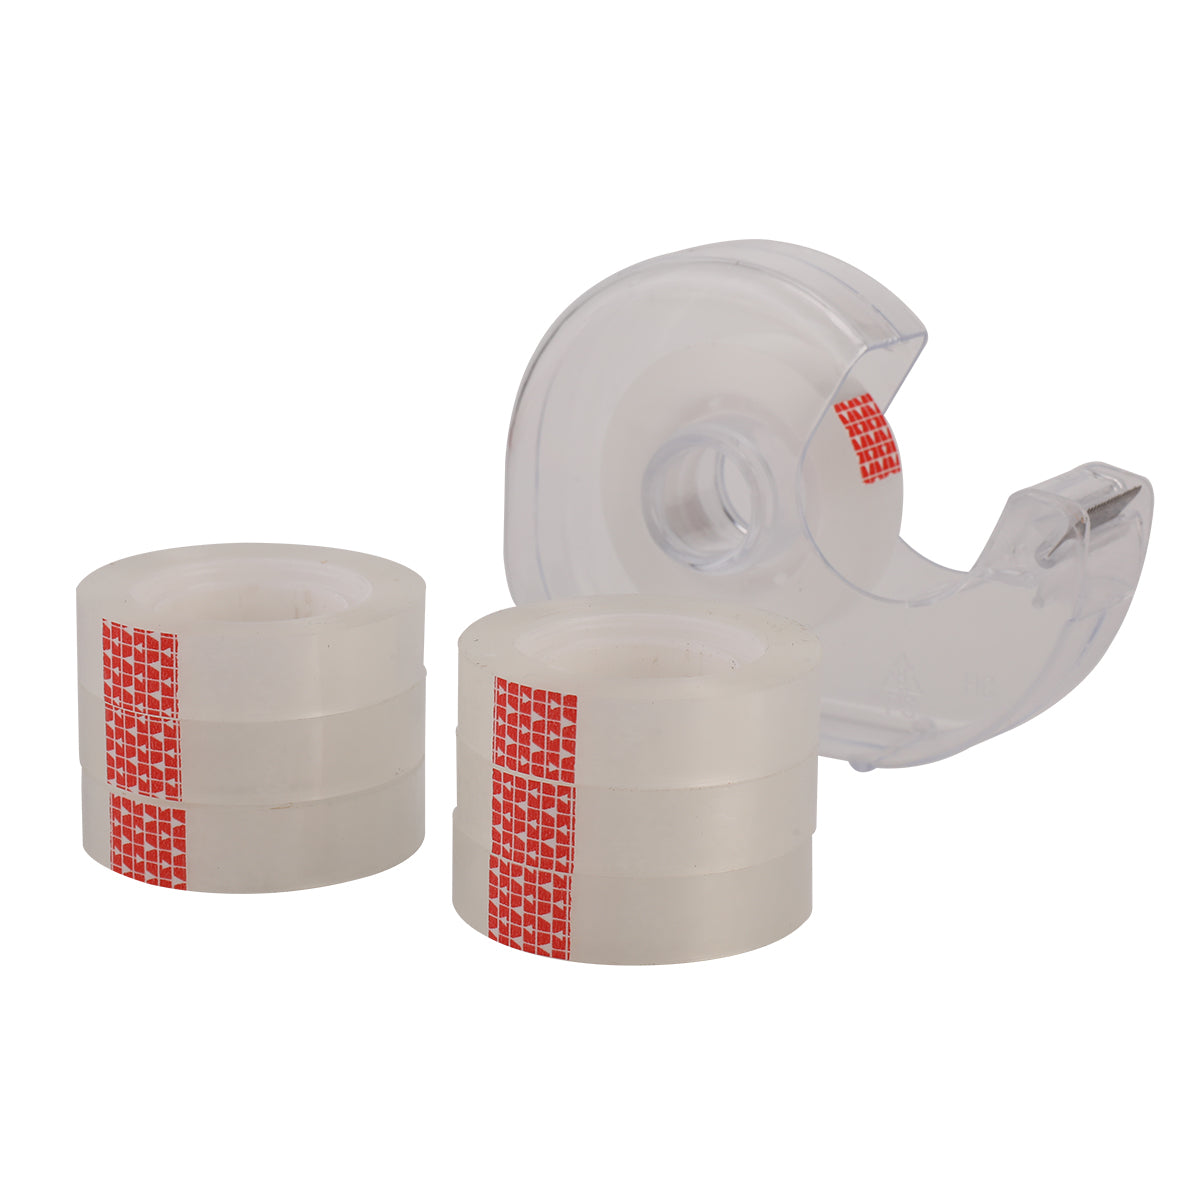 7-Piece Stationery Tape With Plastic Tape Machine